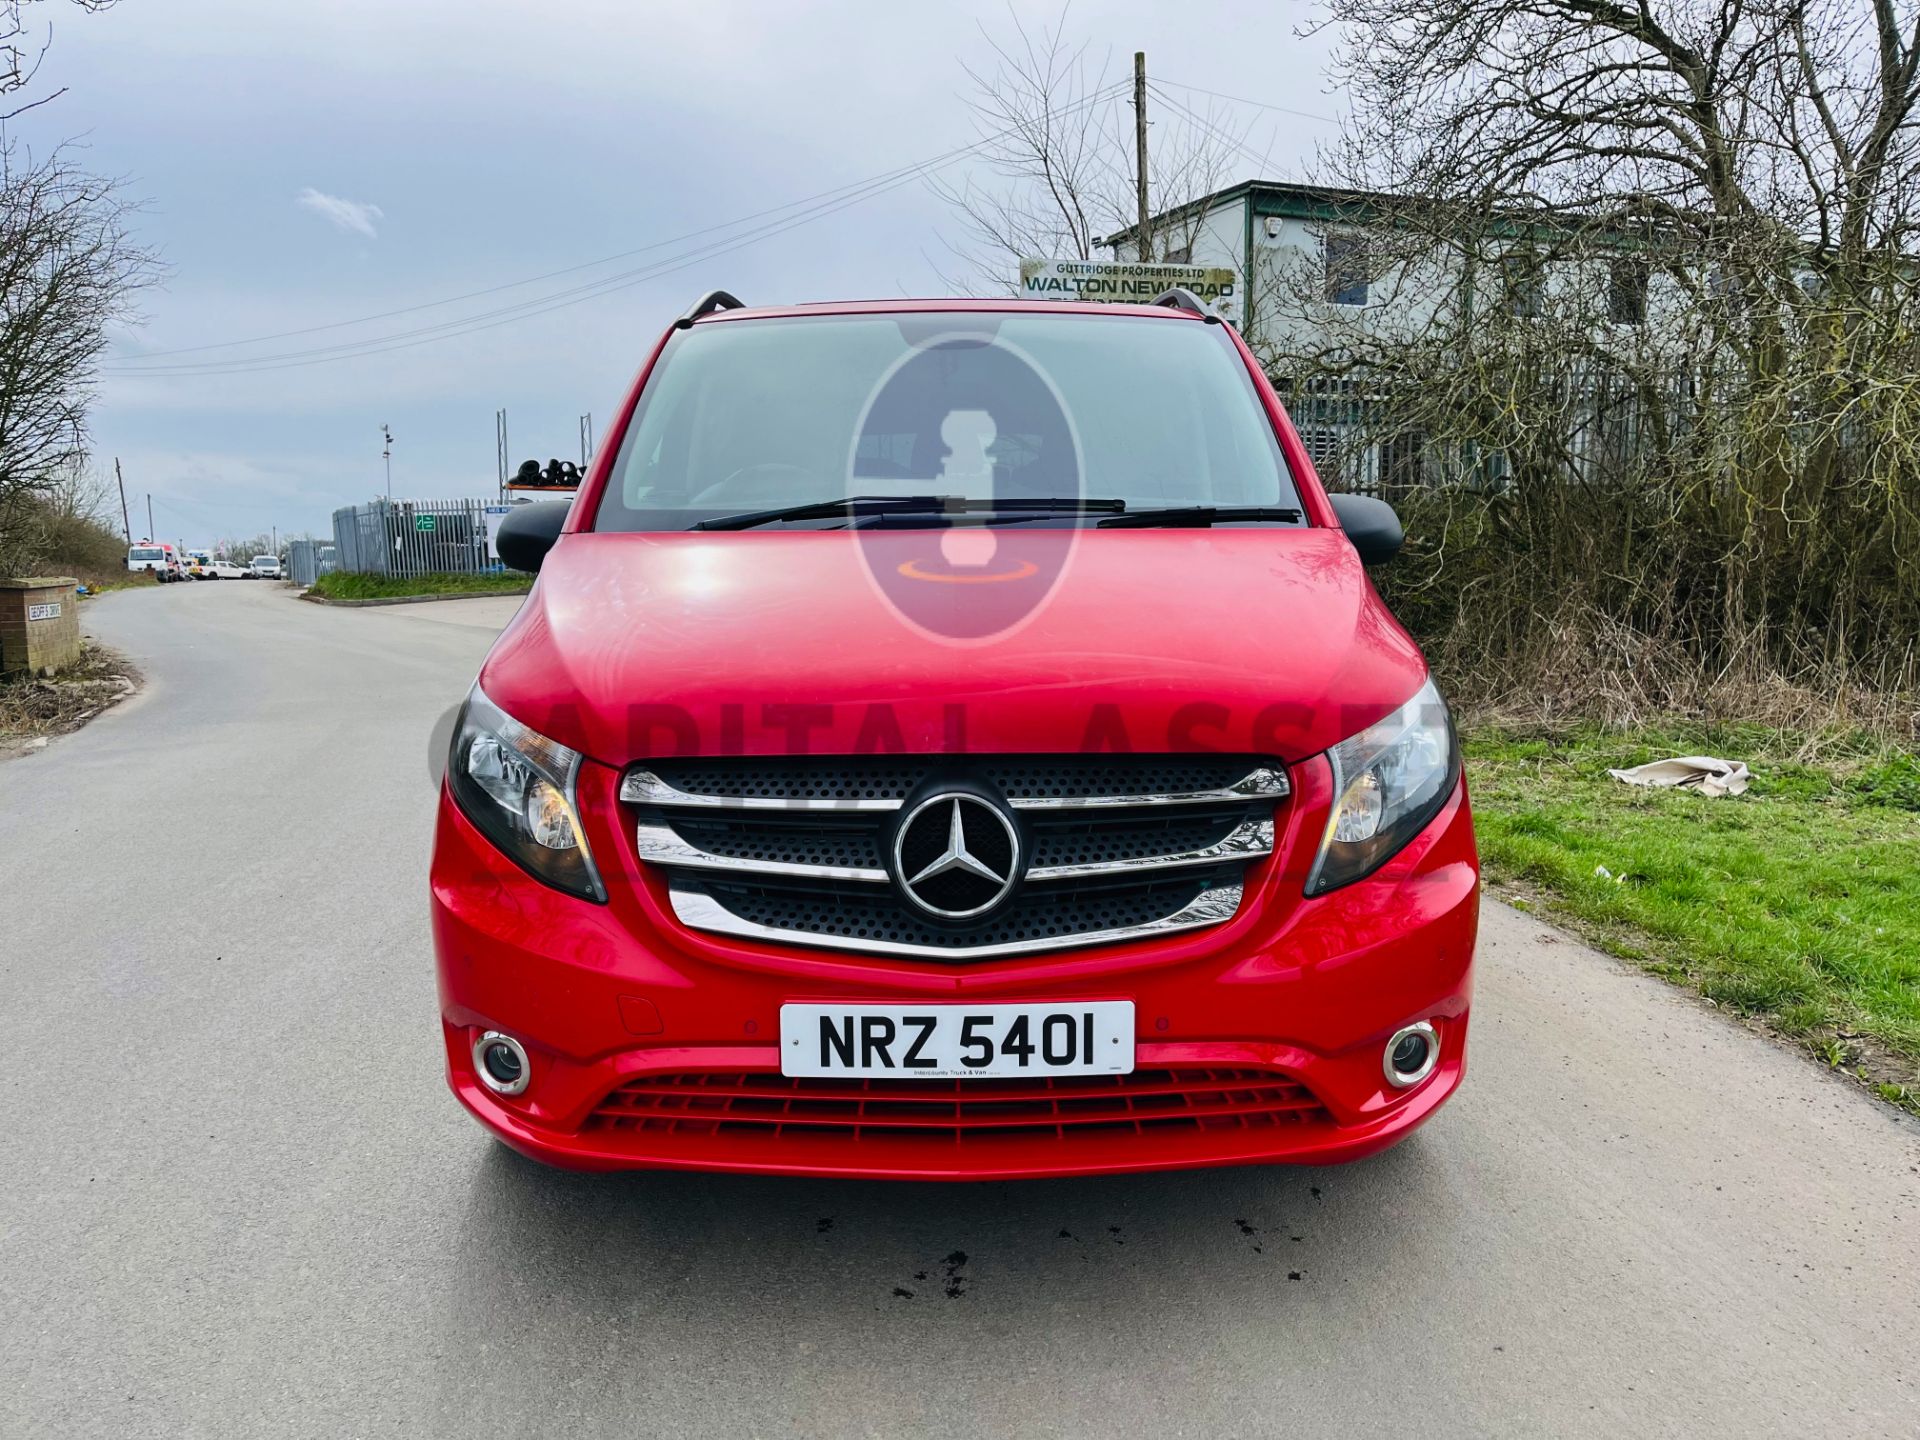 MERCEDES VITO 119CDI "SPORT" 7G-AUTO LWB DUALINER / 5 SEATER (2018 REG) ONLY 28K MILES (NO VAT) - Image 4 of 35